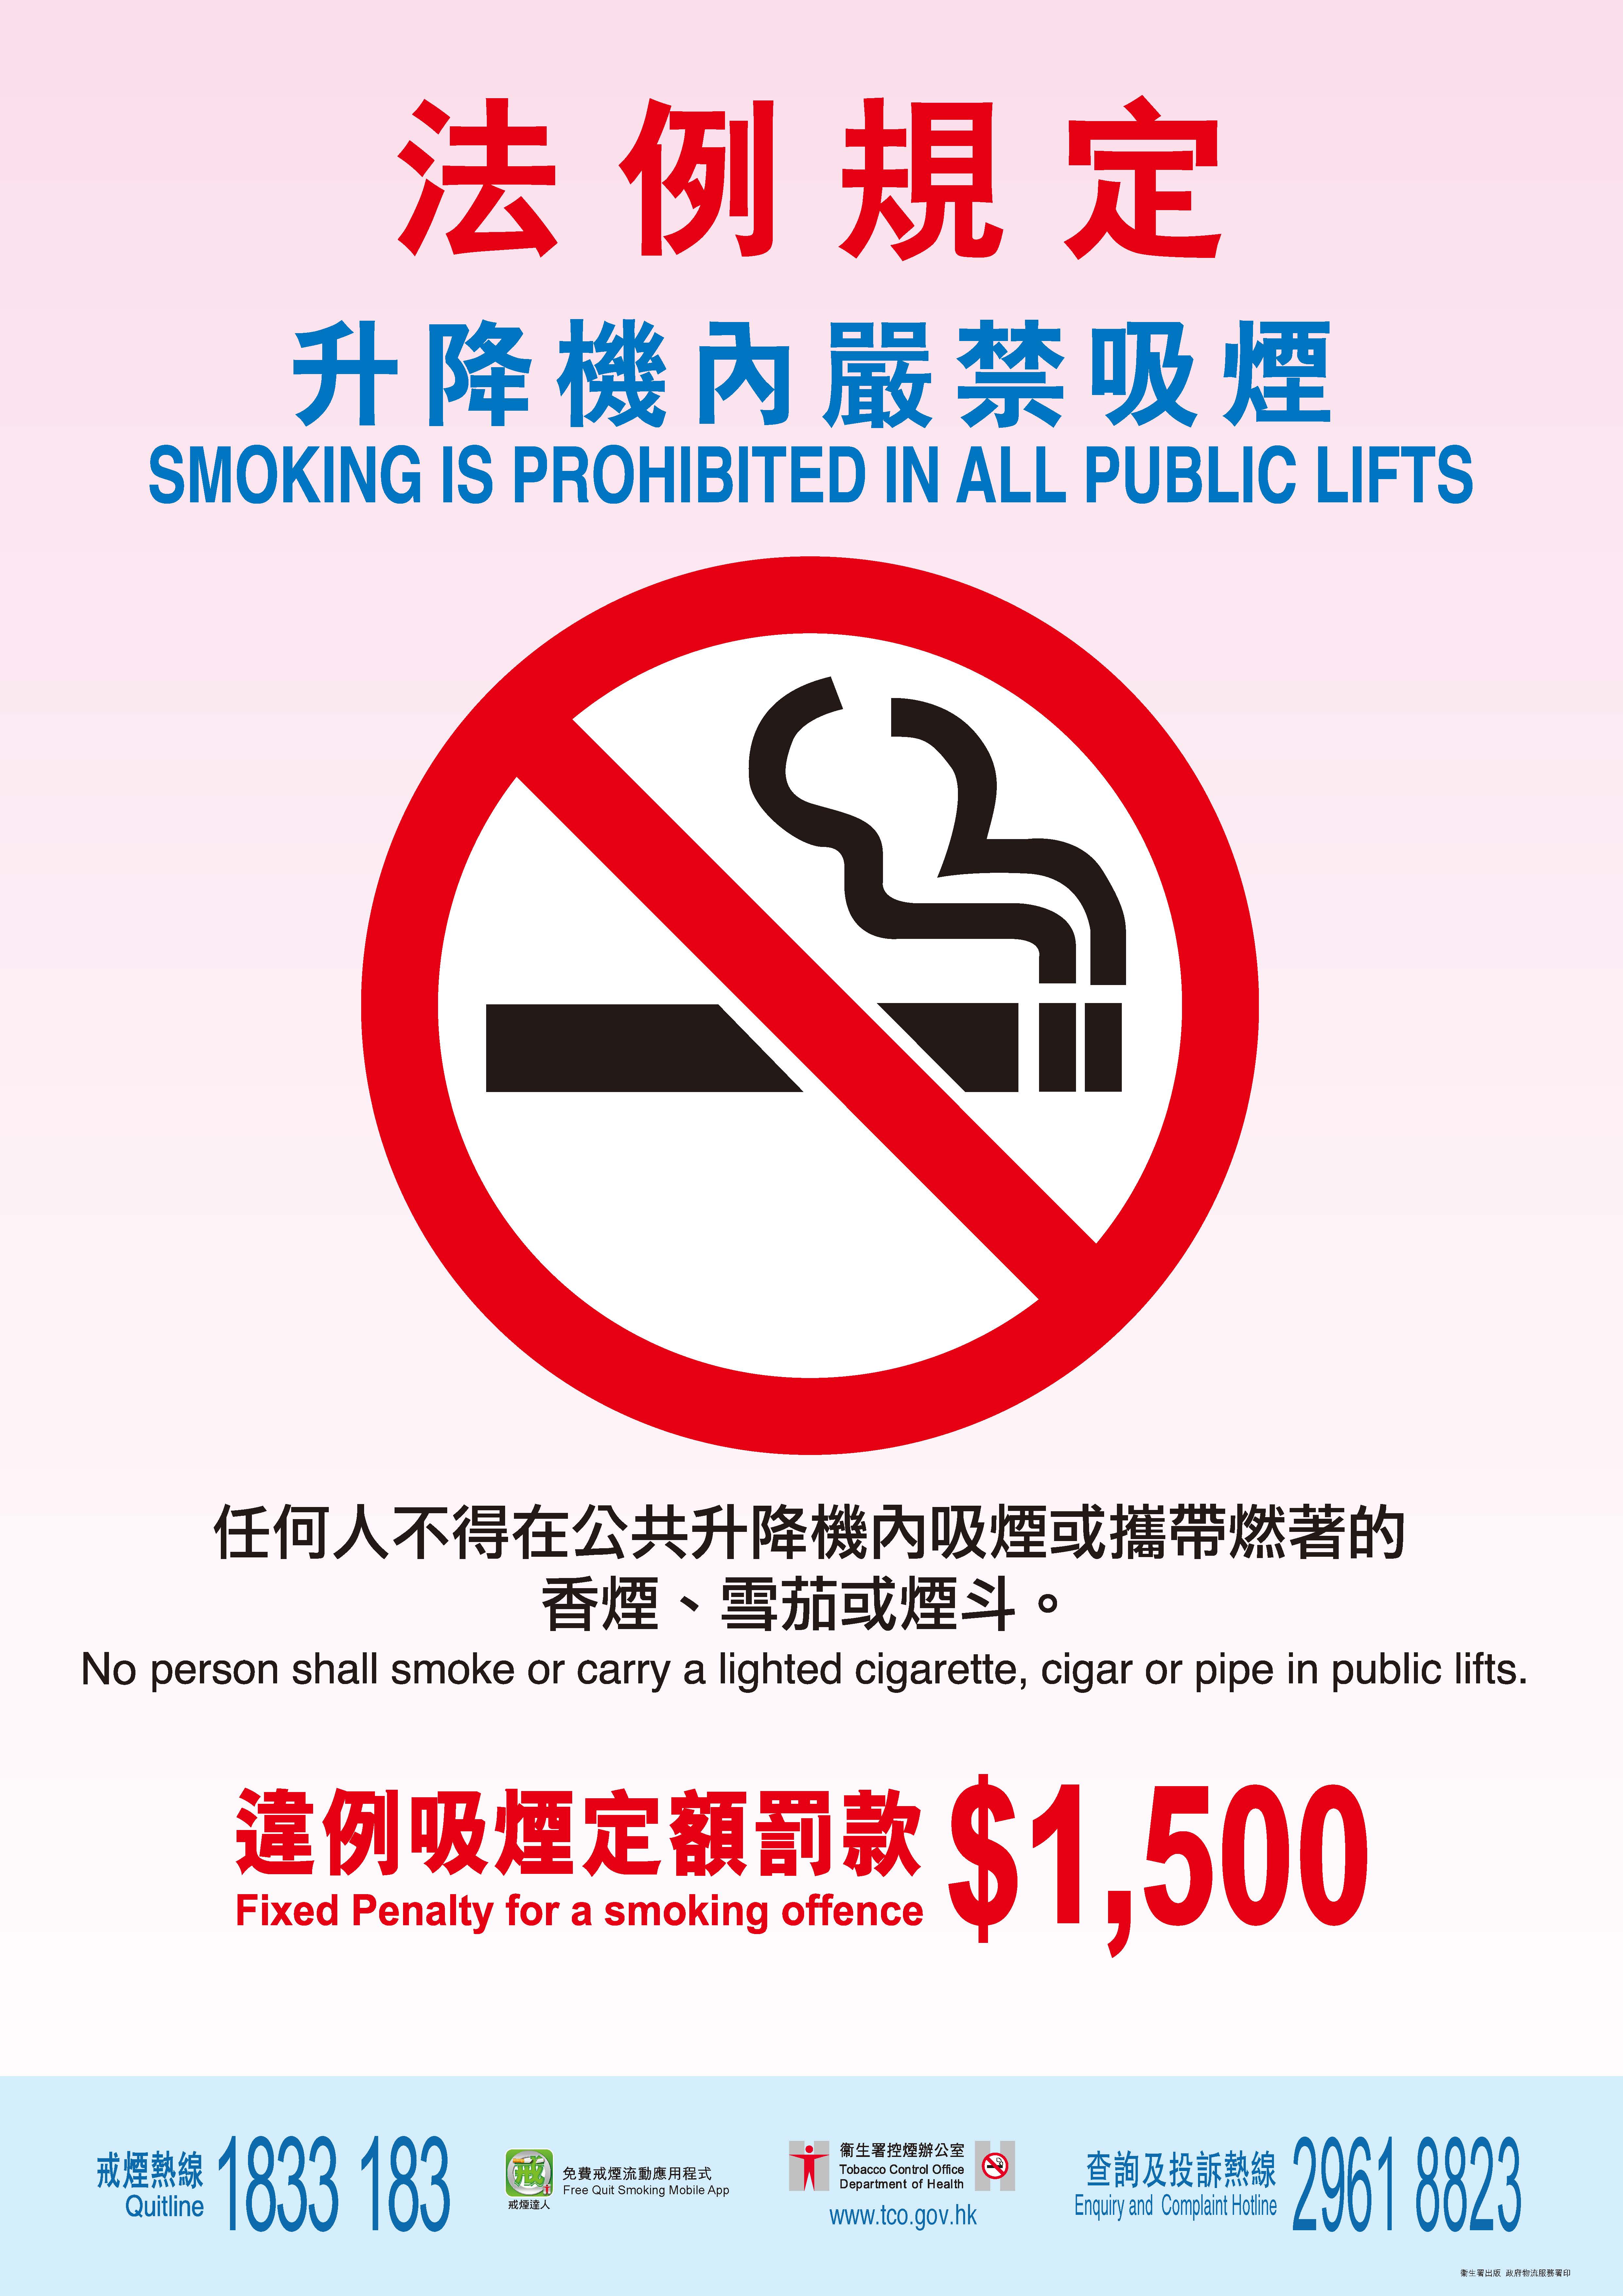 Smoking is prohibited in public lifts Fixed Penalty for a smoking offence $1,500